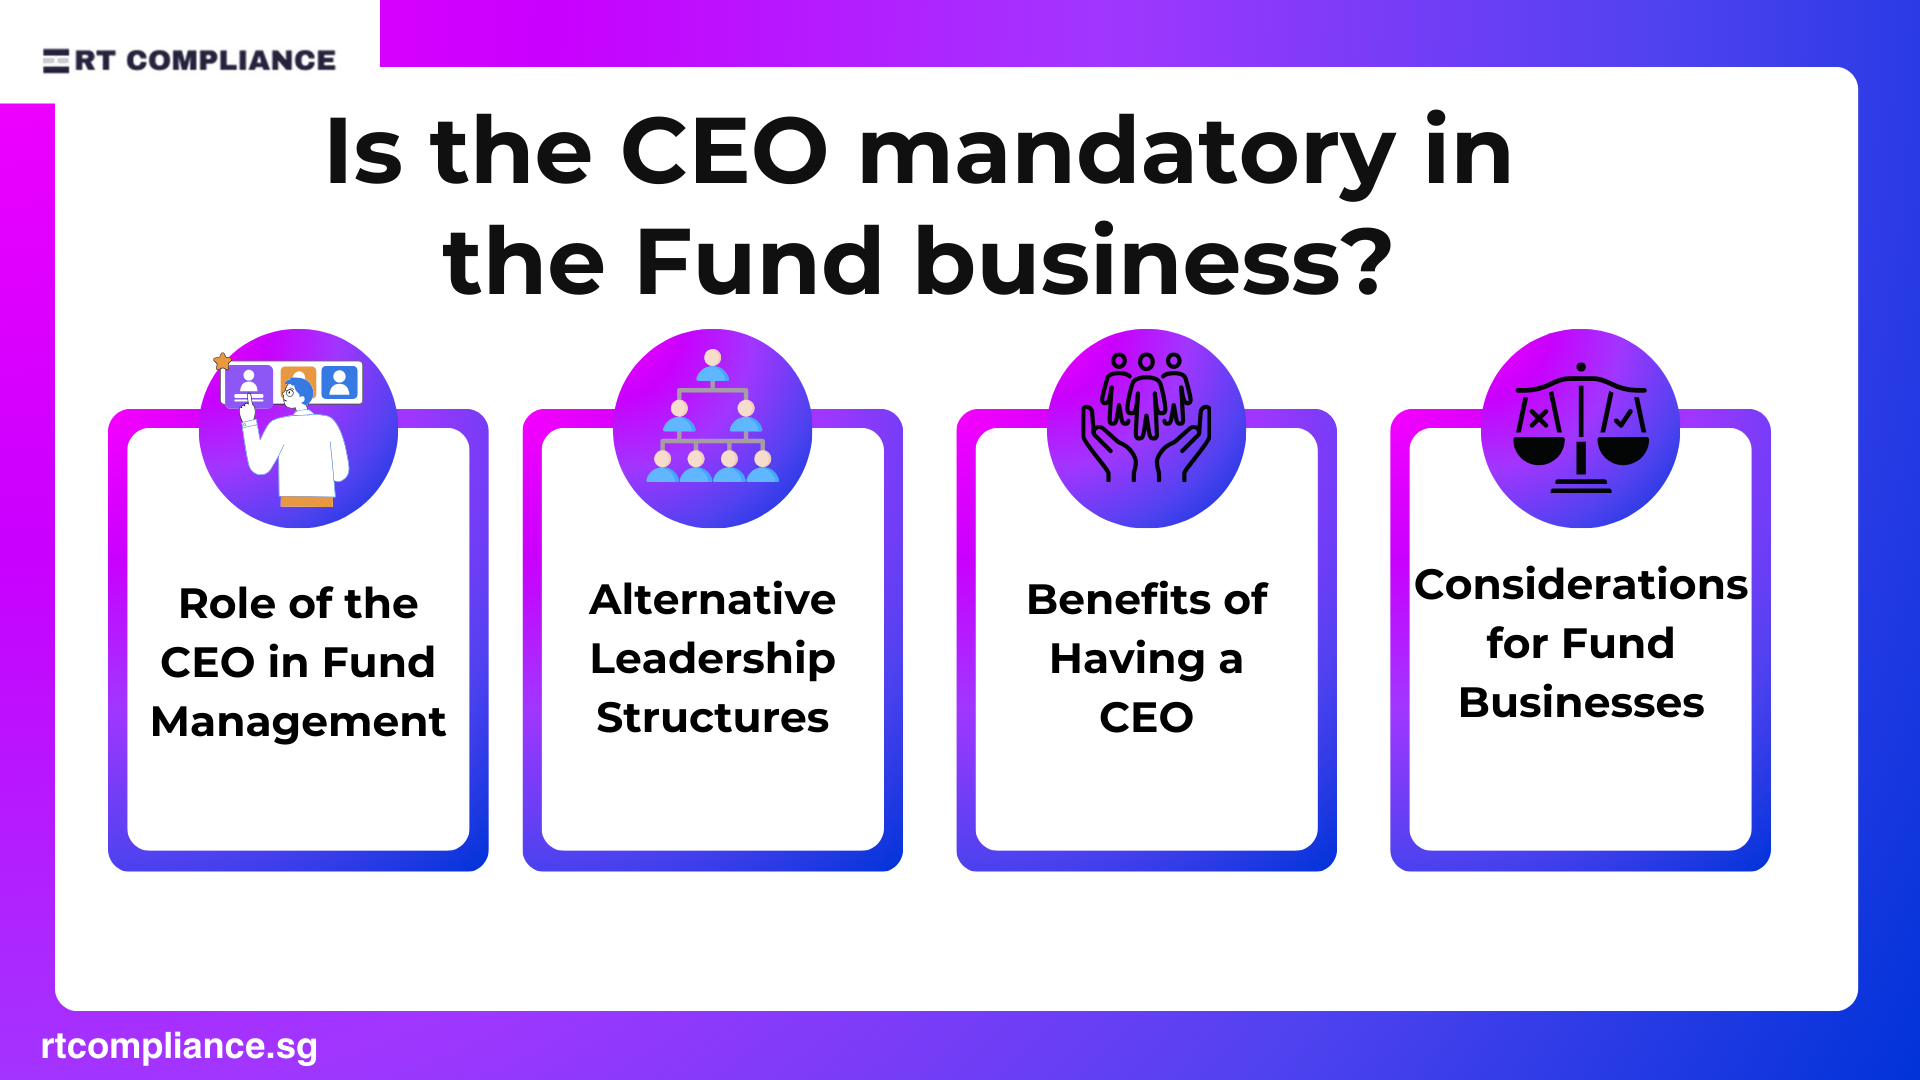 the Fund business